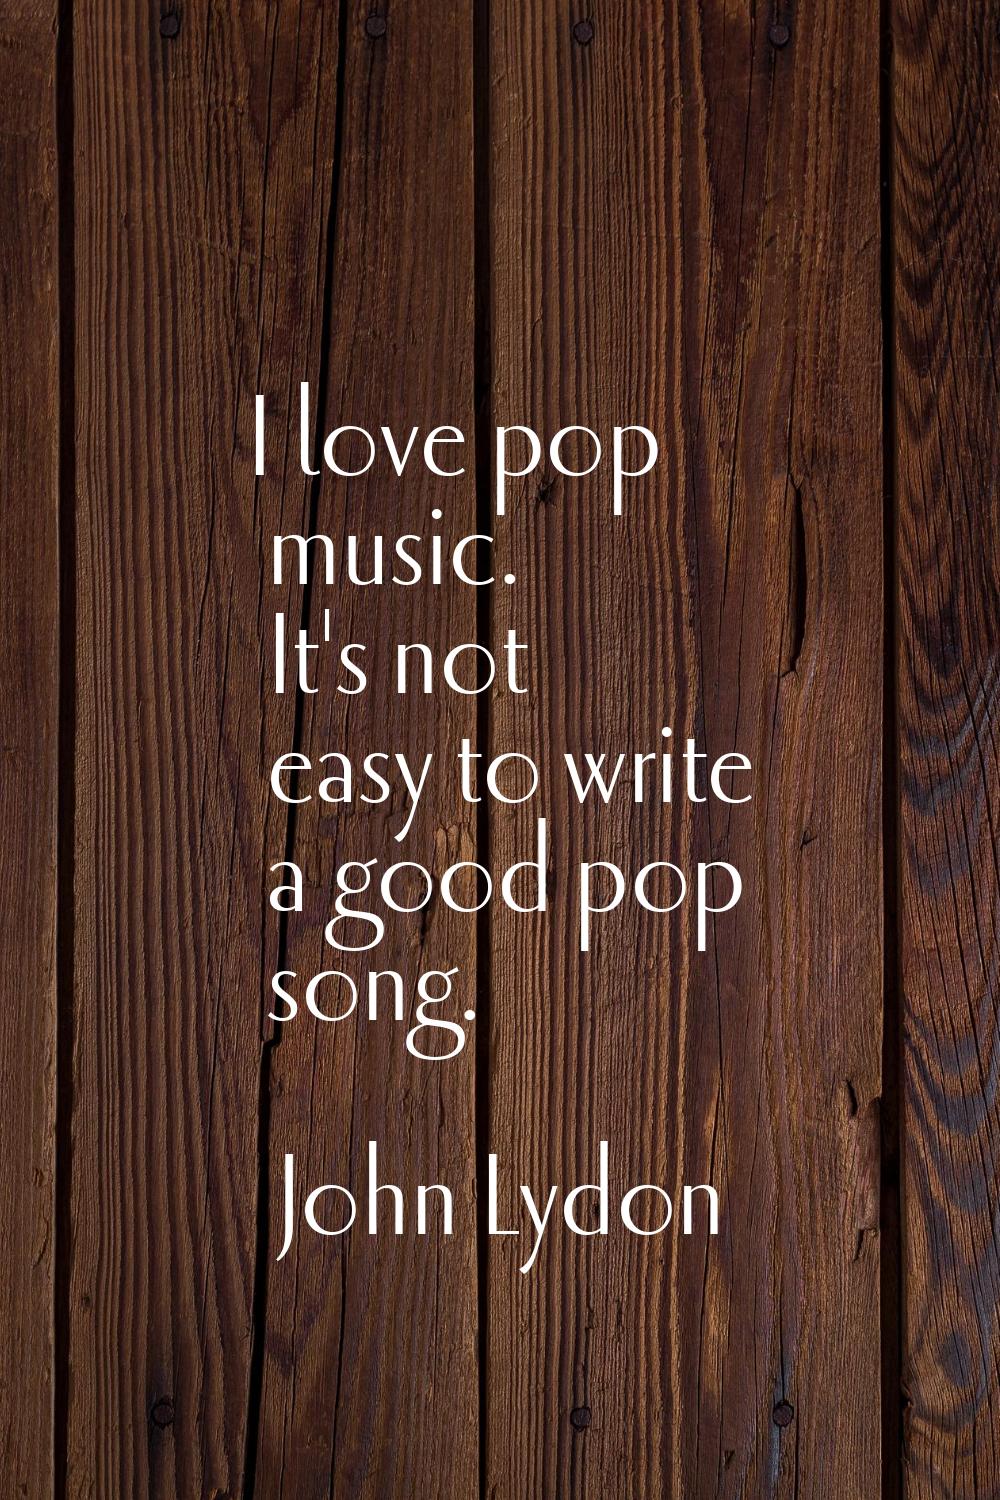 I love pop music. It's not easy to write a good pop song.